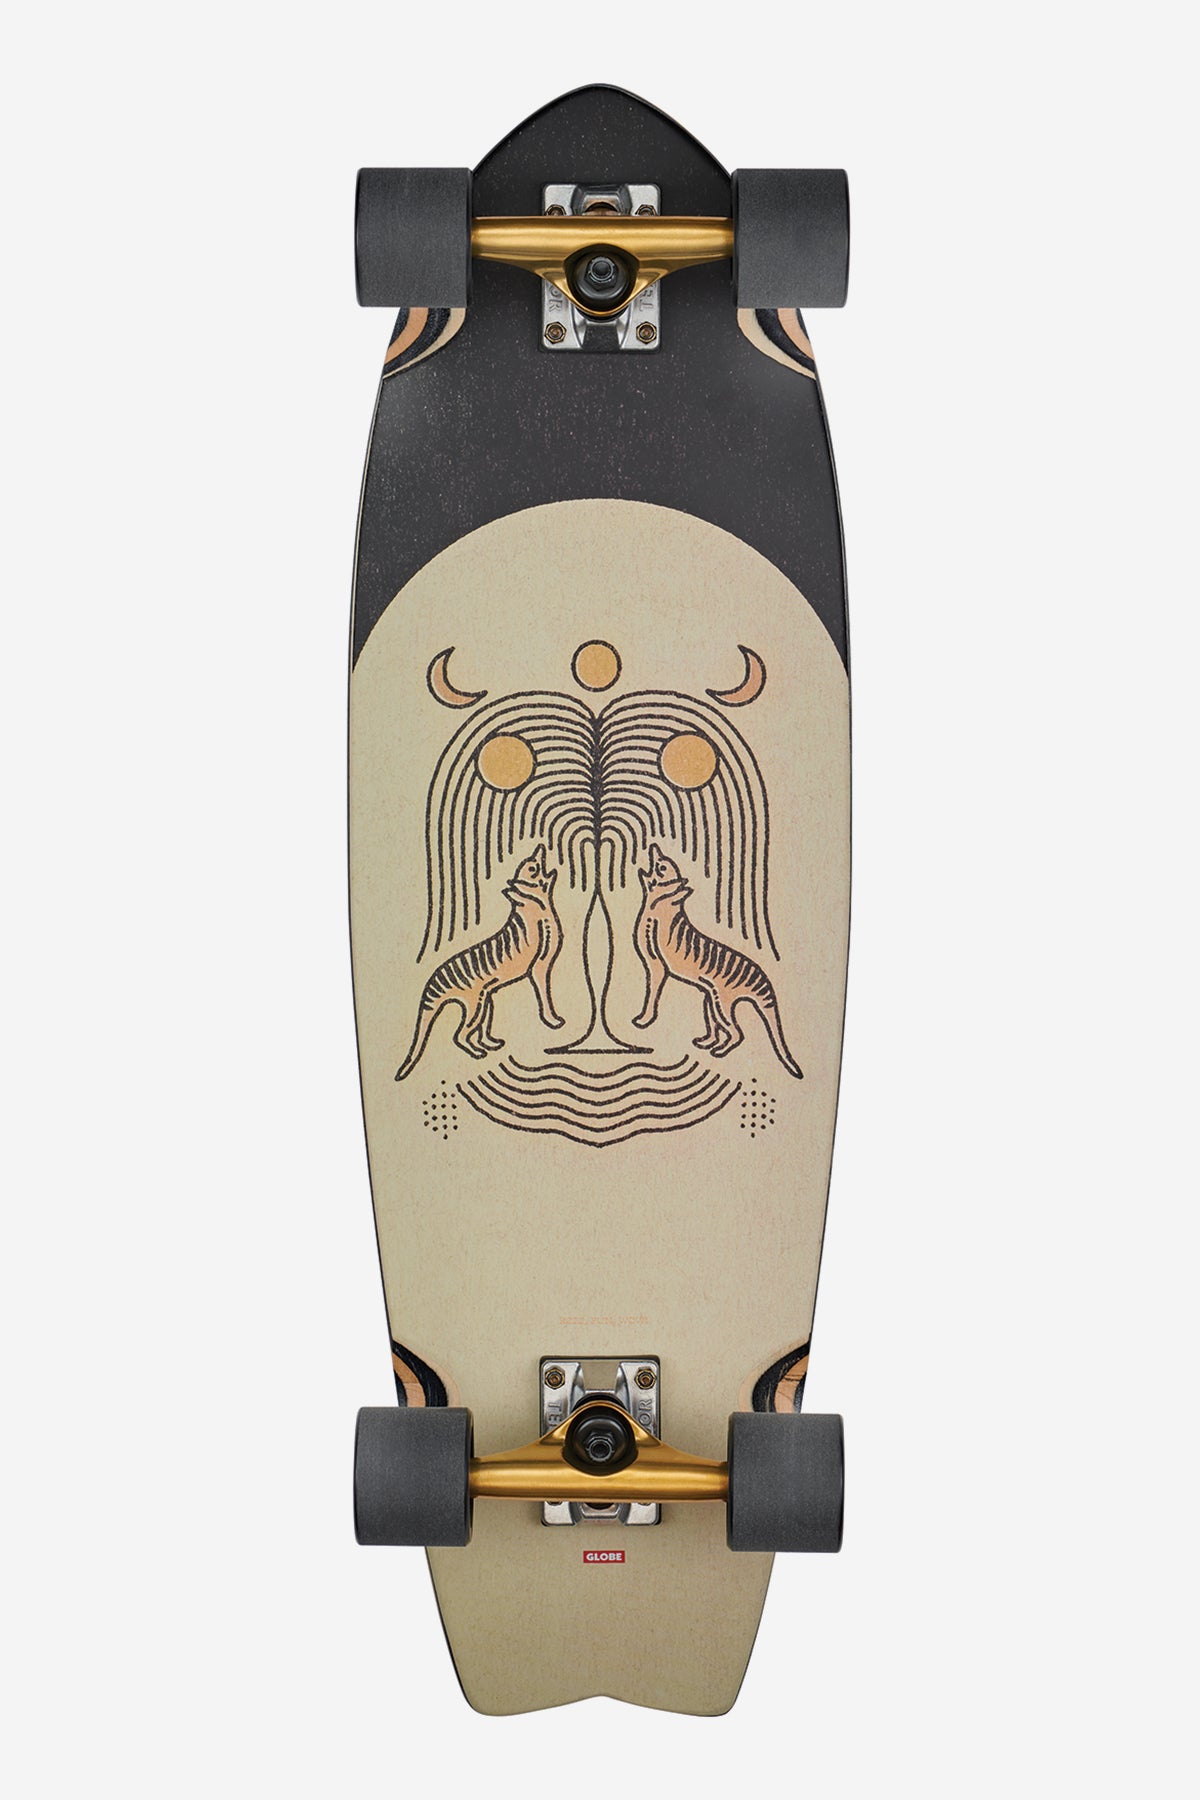 Featured Skateboards